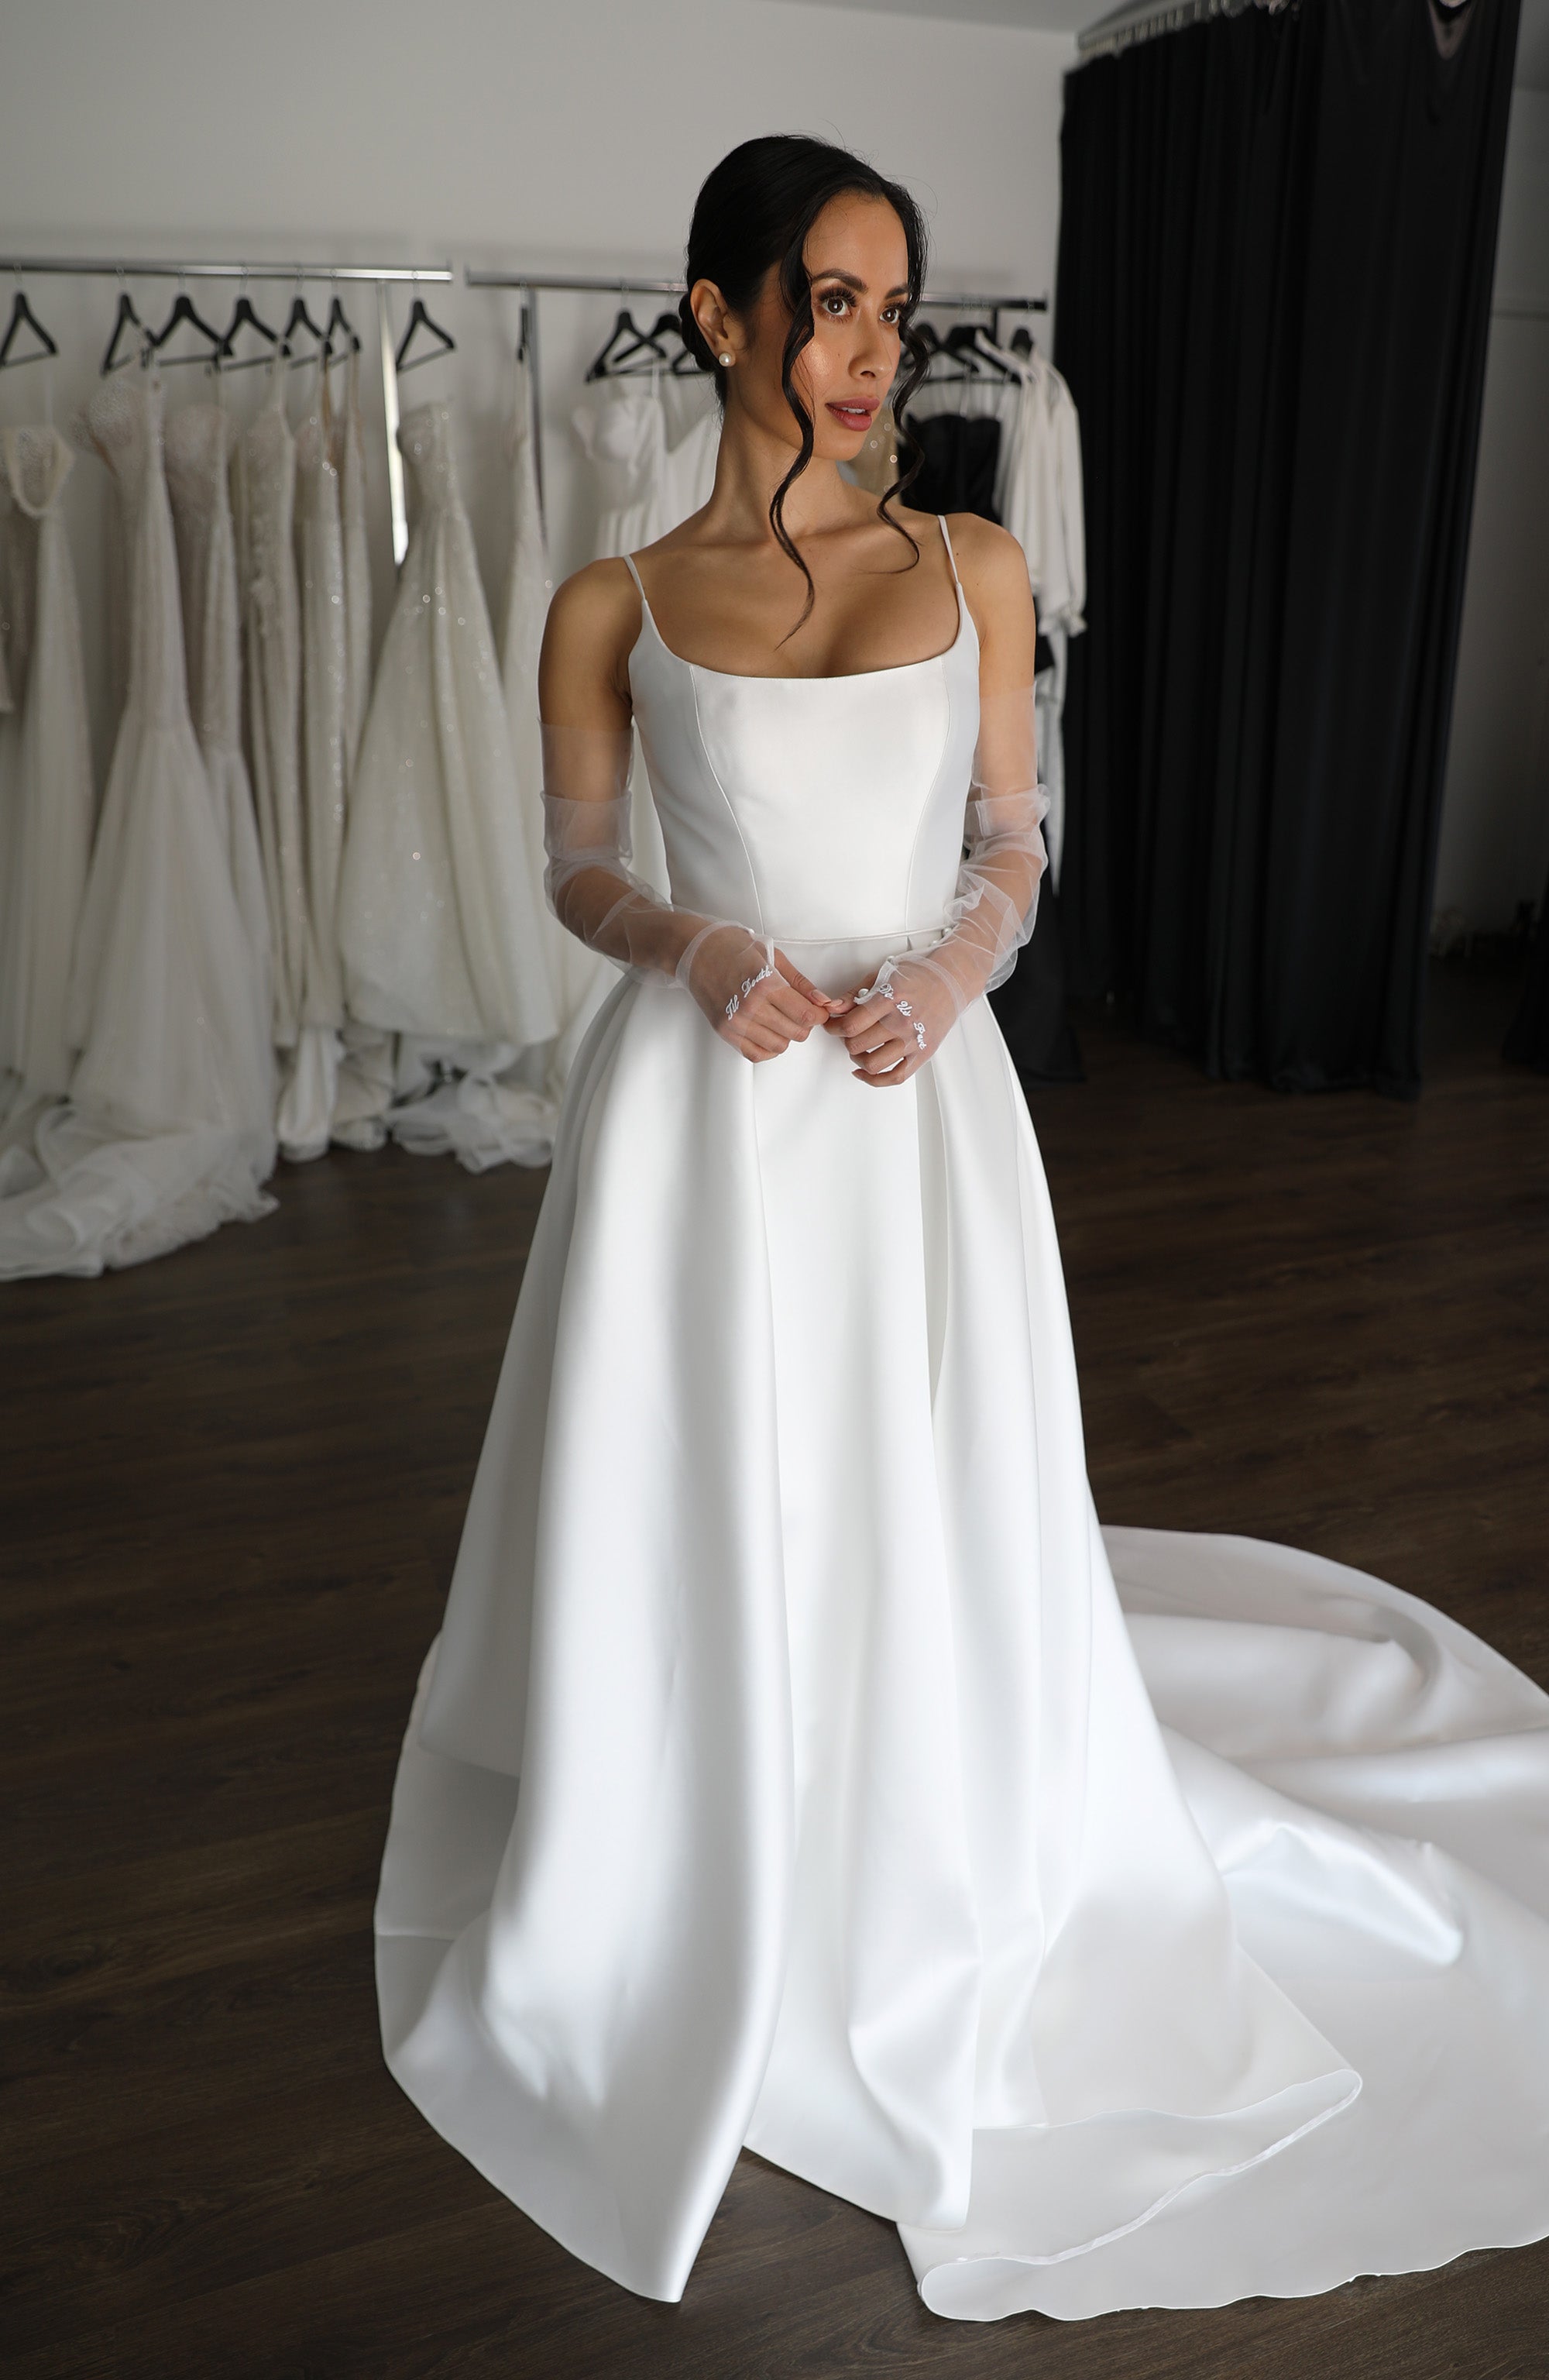 The Complete Guide To Wedding Dress Alterations by Euphorie Studios